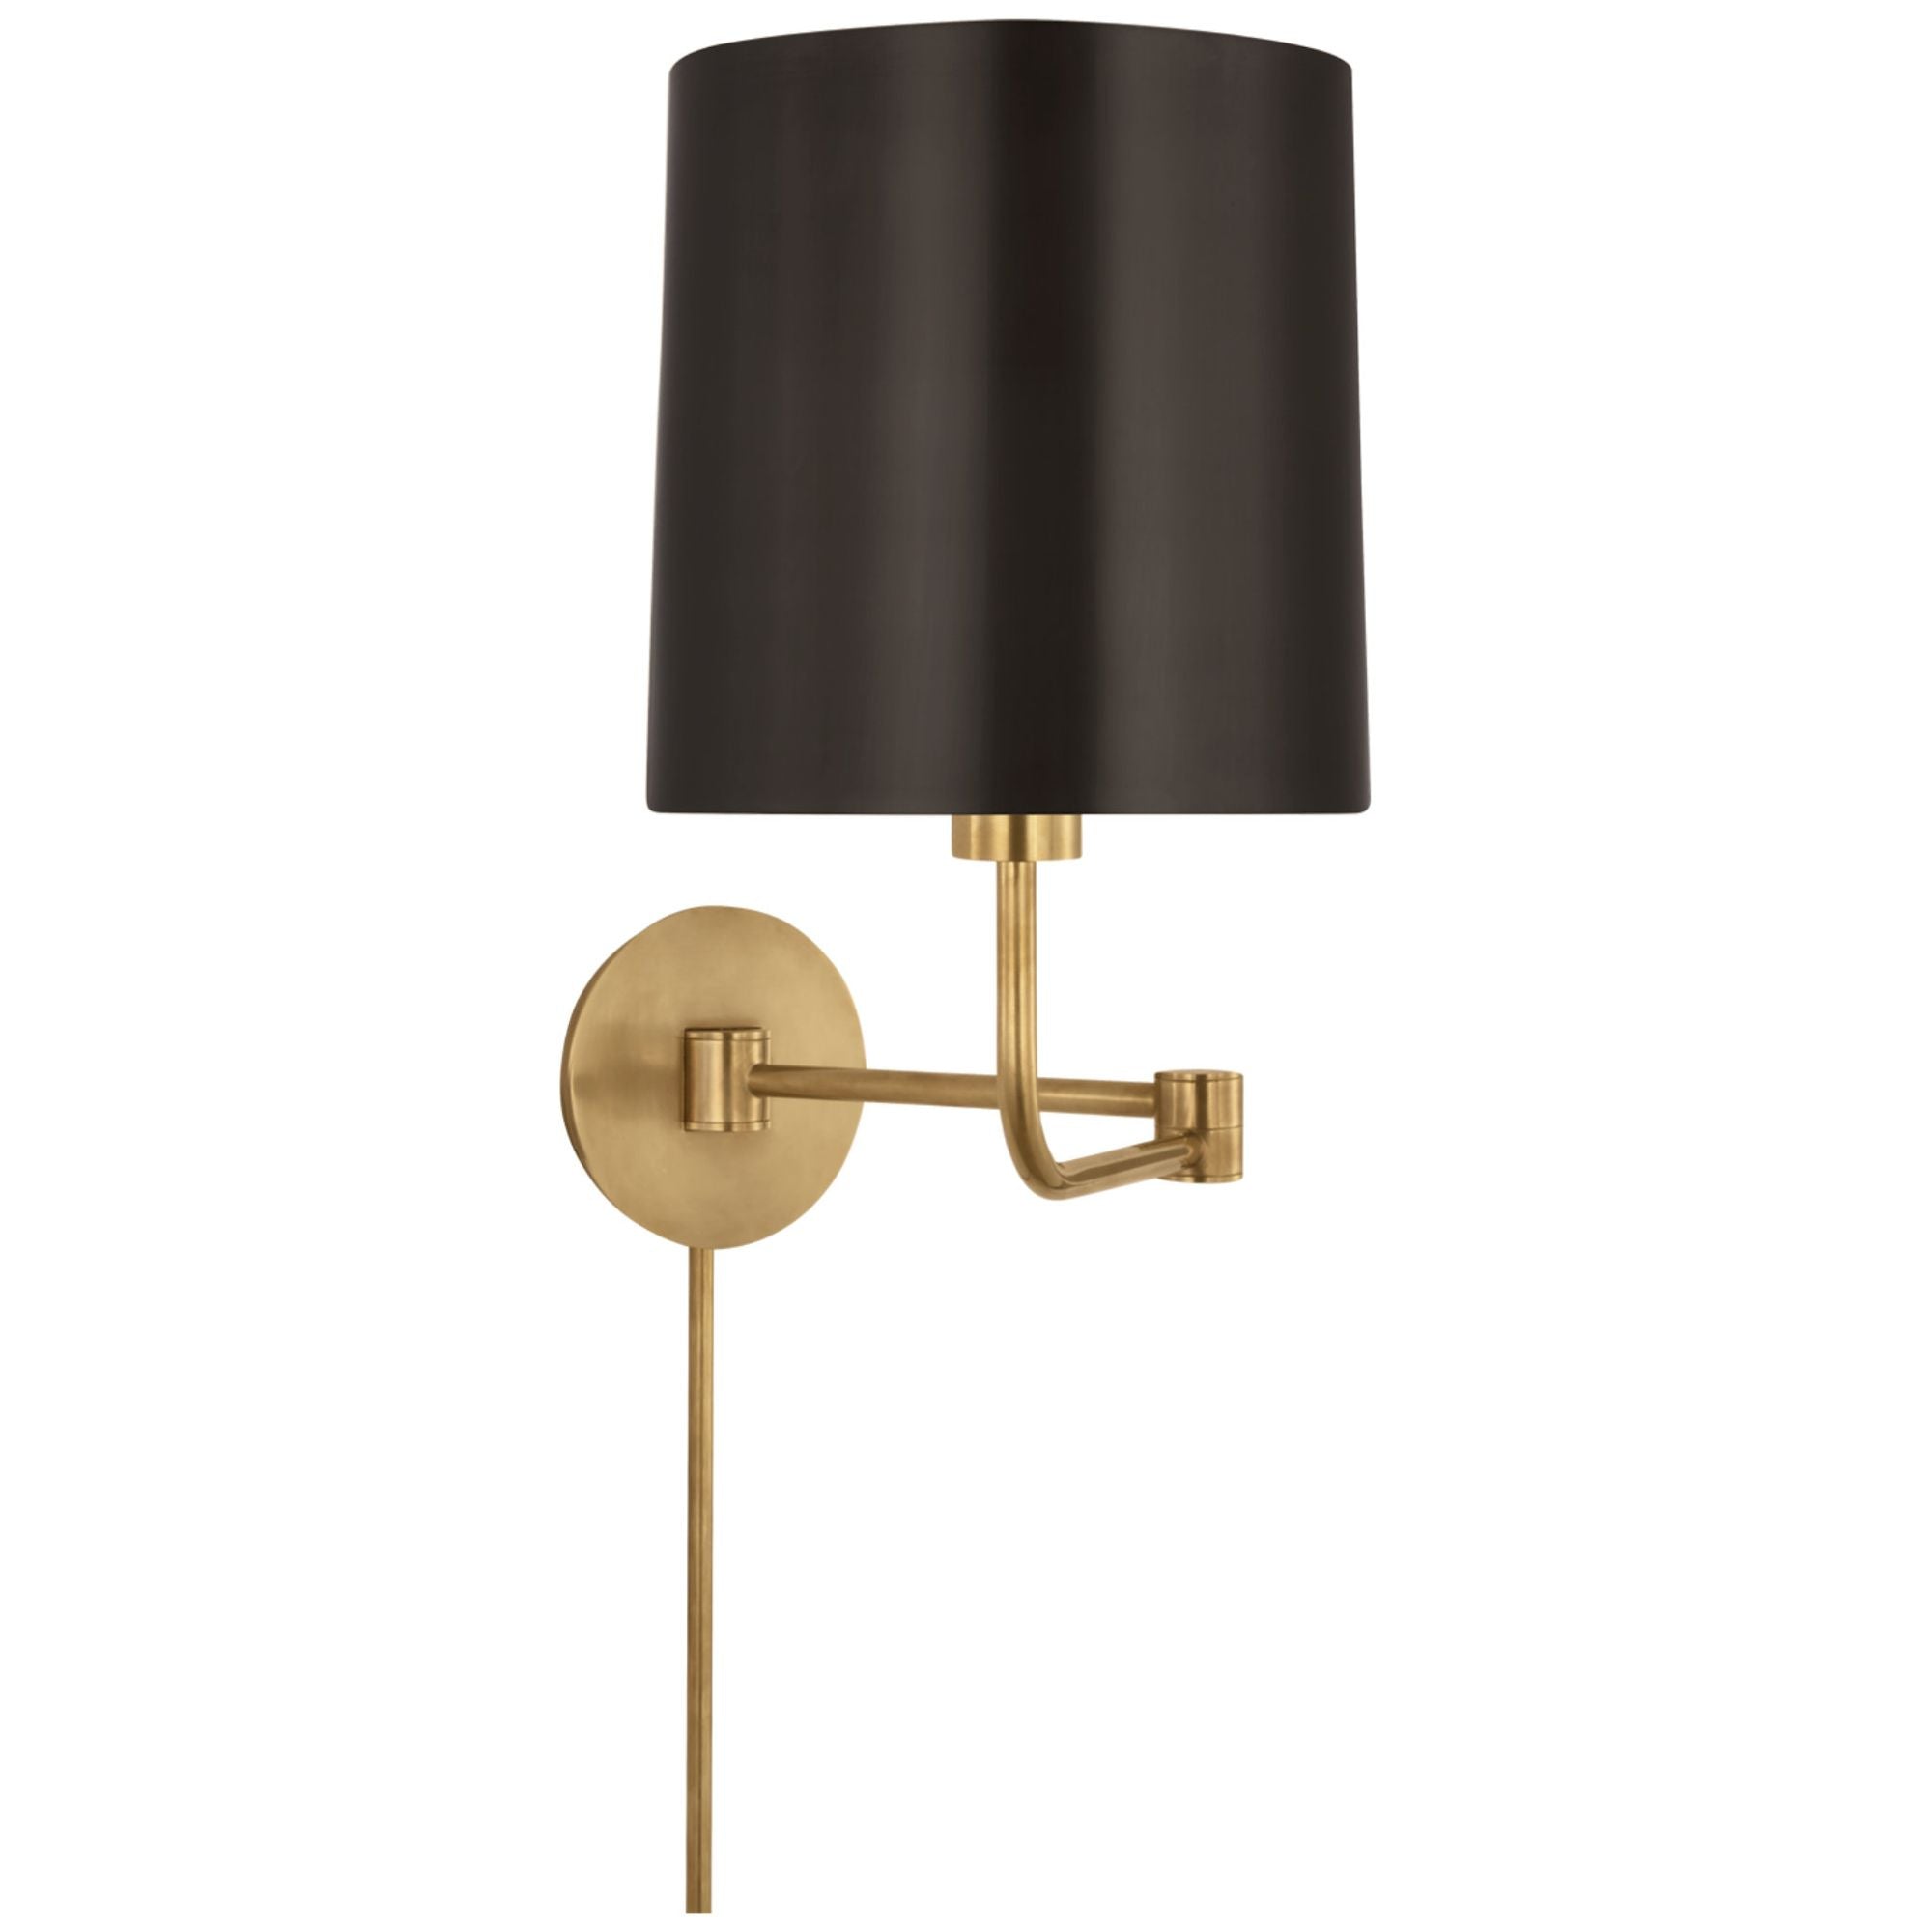 Barbara Barry Go Lightly Swing Arm Wall Light in Soft Brass with Bronze Shade